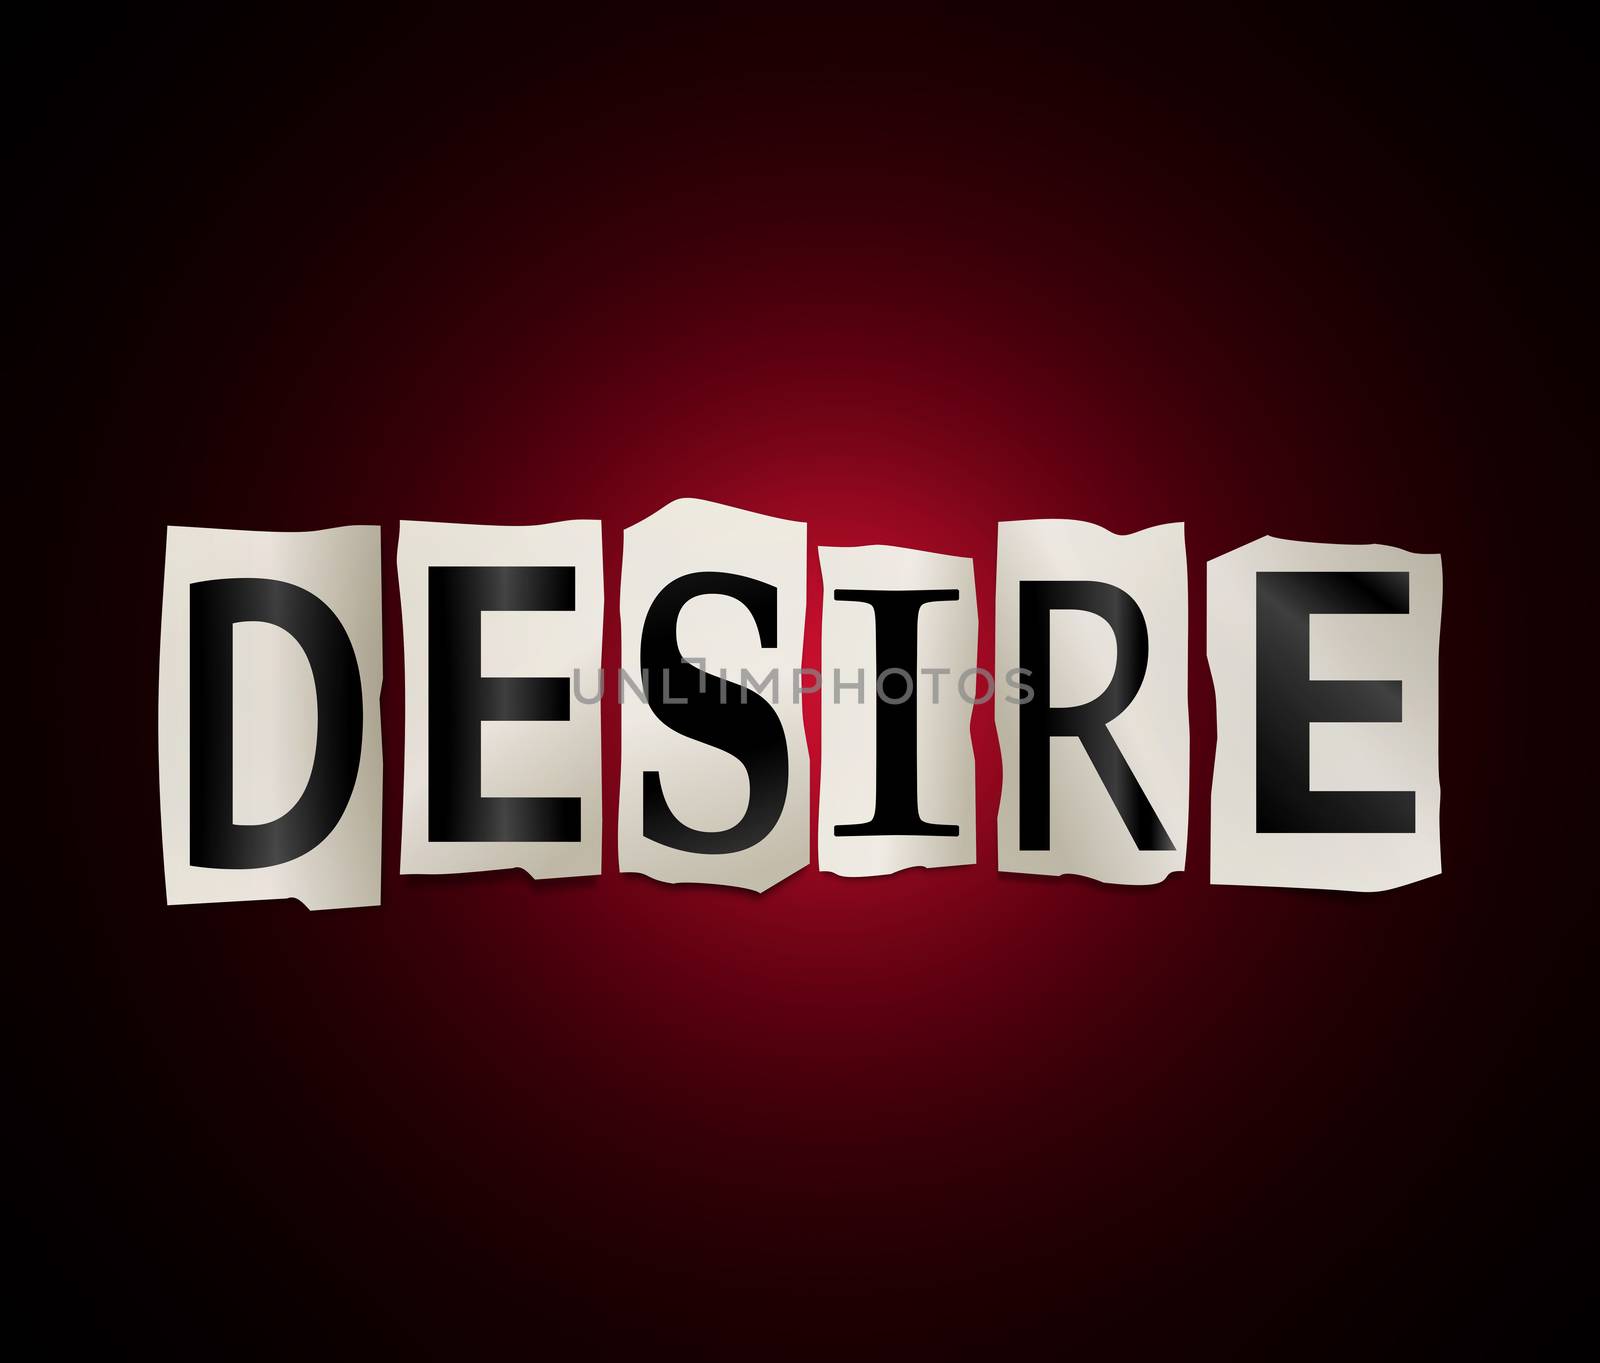 Illustration depicting a set of cut out printed letters arranged to form the word desire.